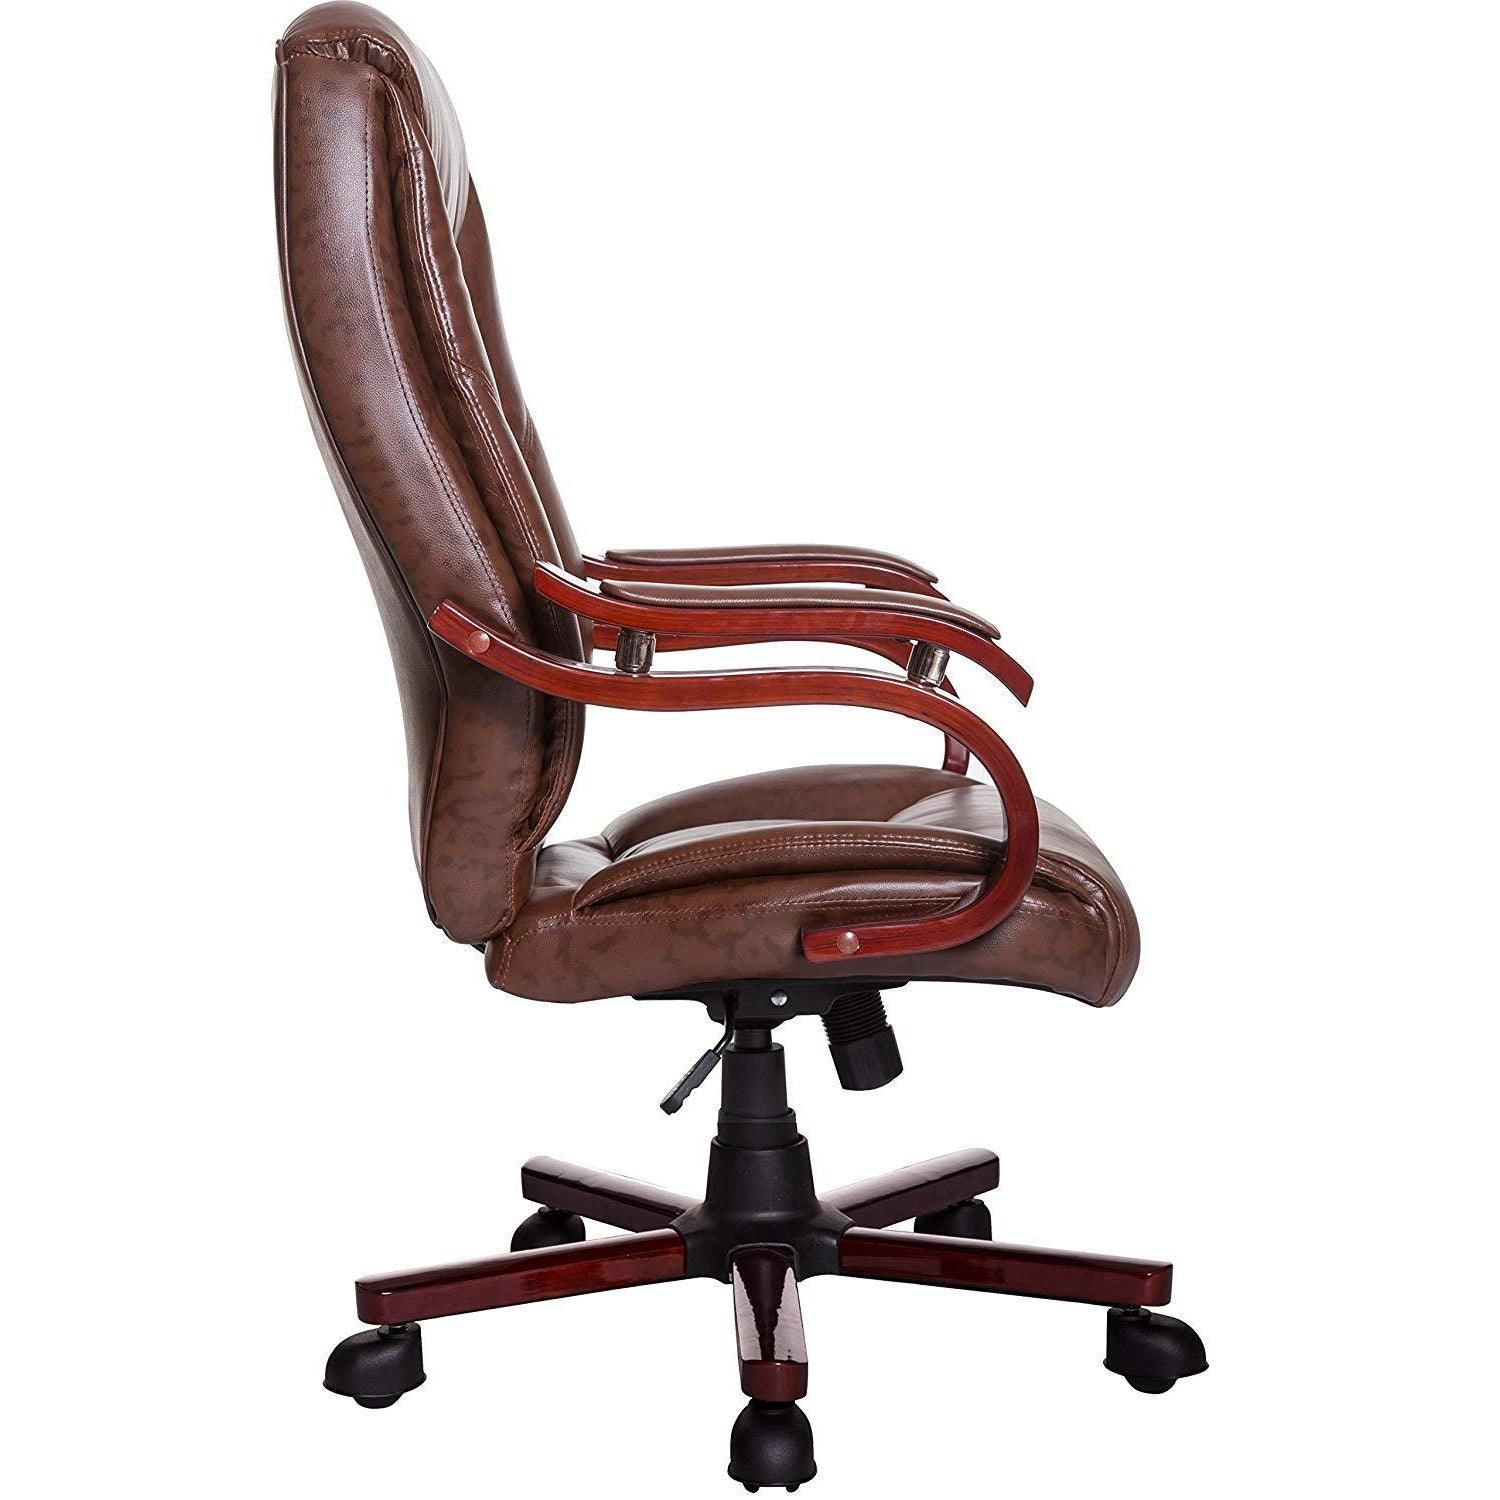 Luxury Wooden Frame Extra Padded Desk Office Chair Light Brown - DaAl's